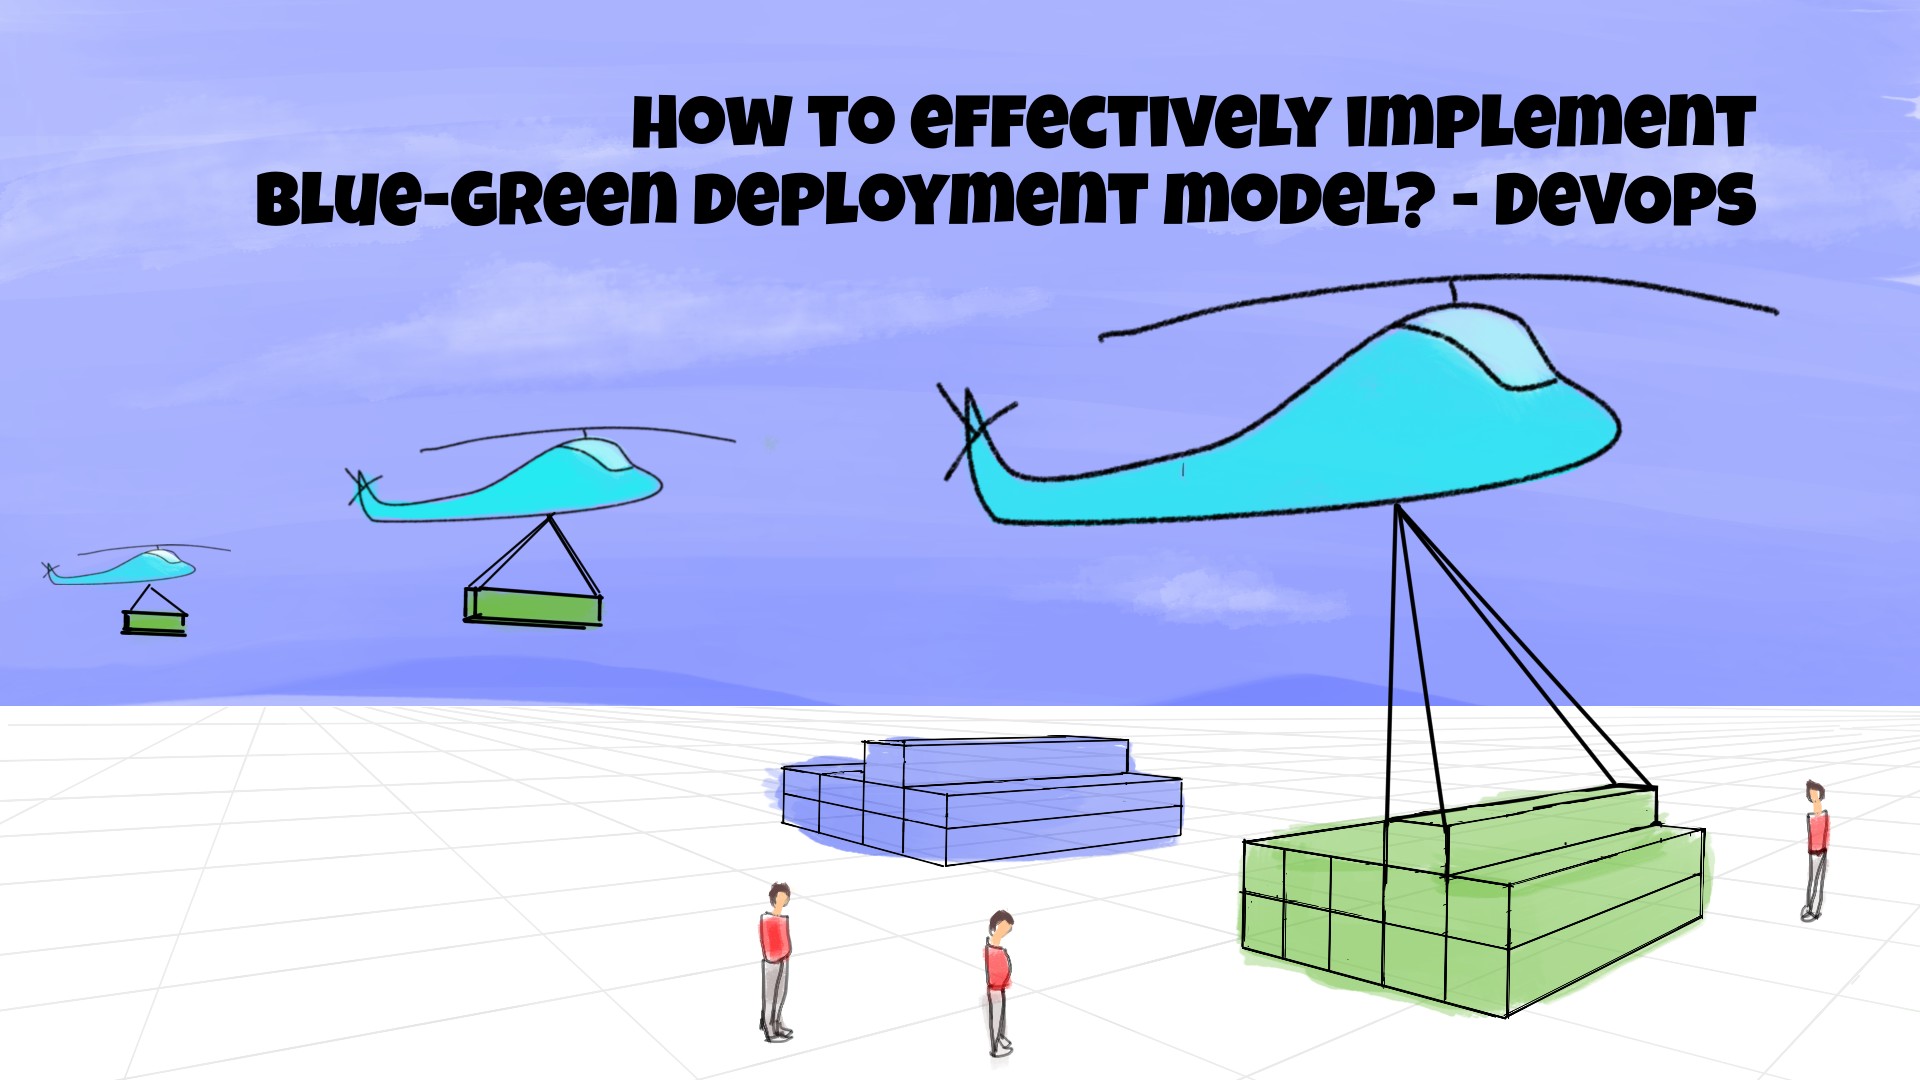 Two sets of containers determine by blue and green colour.  The helicopter carries green containers. It conceptually represents blue-green deployment.